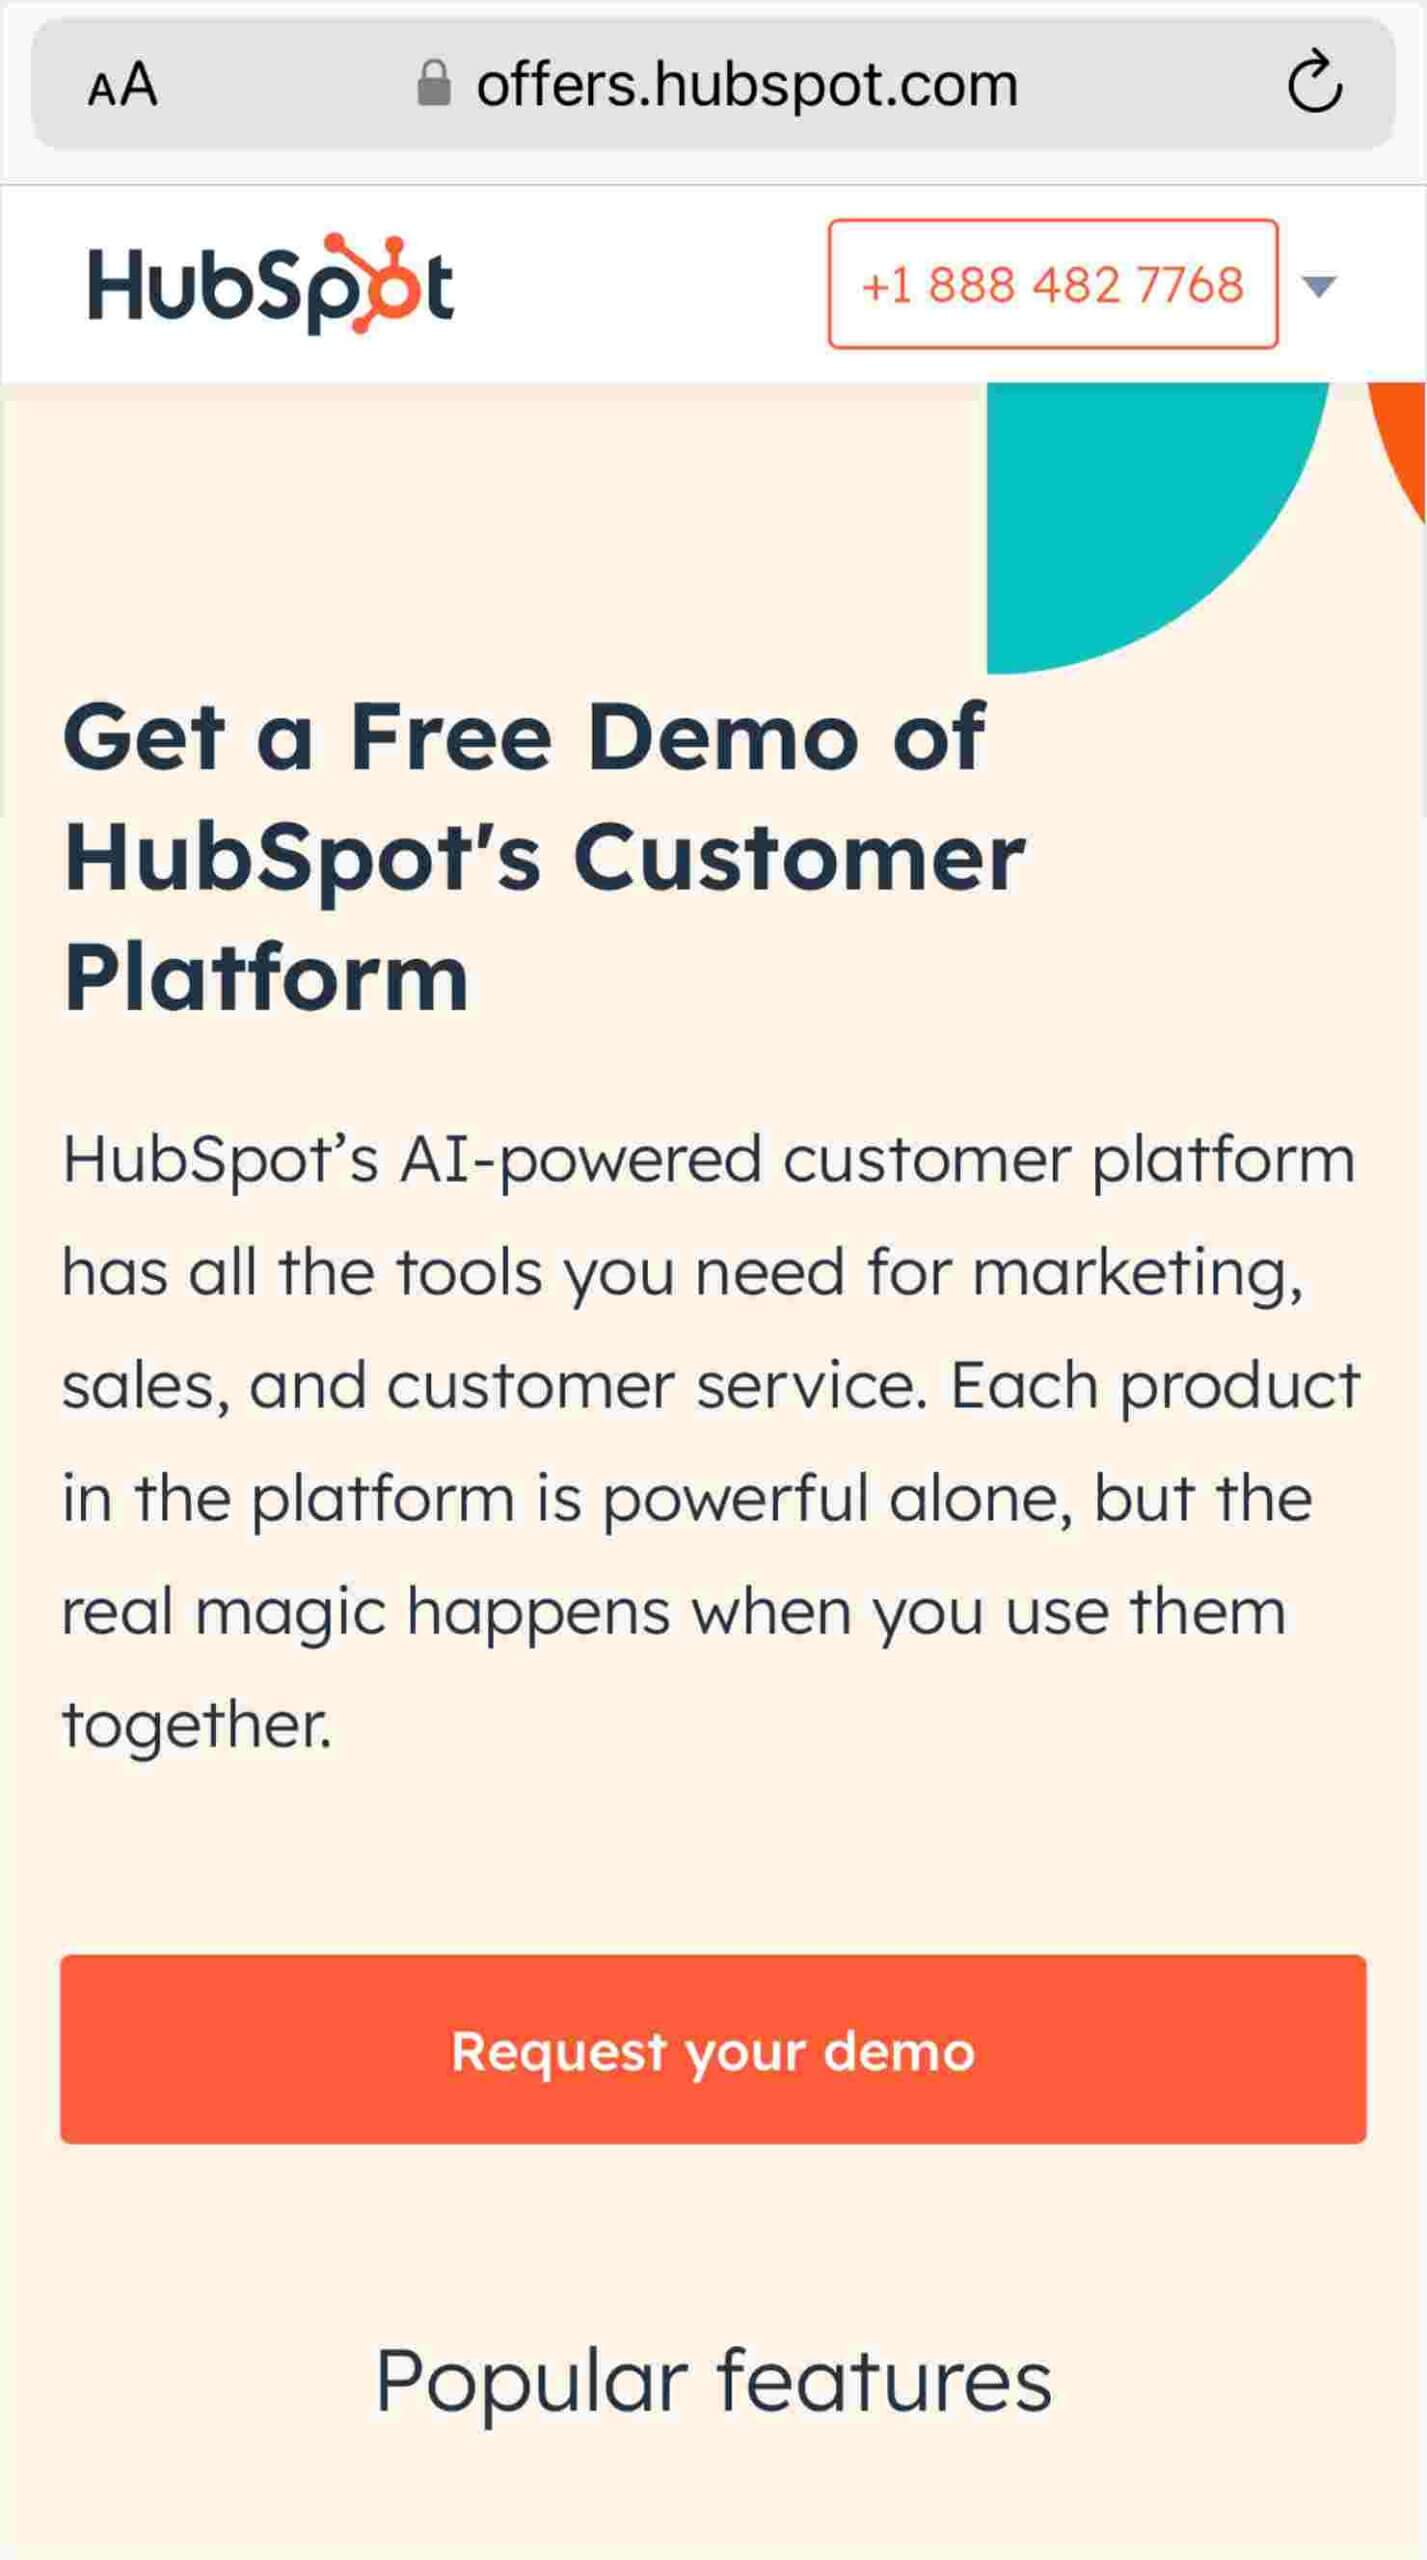 Screenshot of a mobile landing page from HubSpot featuring a header with their logo and a phone number. Below is a prominent heading stating 'Get a Free Demo of HubSpot’s Customer Platform.' A paragraph explains HubSpot’s AI-powered customer platform encompassing tools for marketing, sales, and customer service, noting the synergy when using the products together. A large, attention-grabbing red button reads 'Request your demo,' indicating a call-to-action. The section below the button is titled 'Popular features,' indicating more information is available if scrolled.